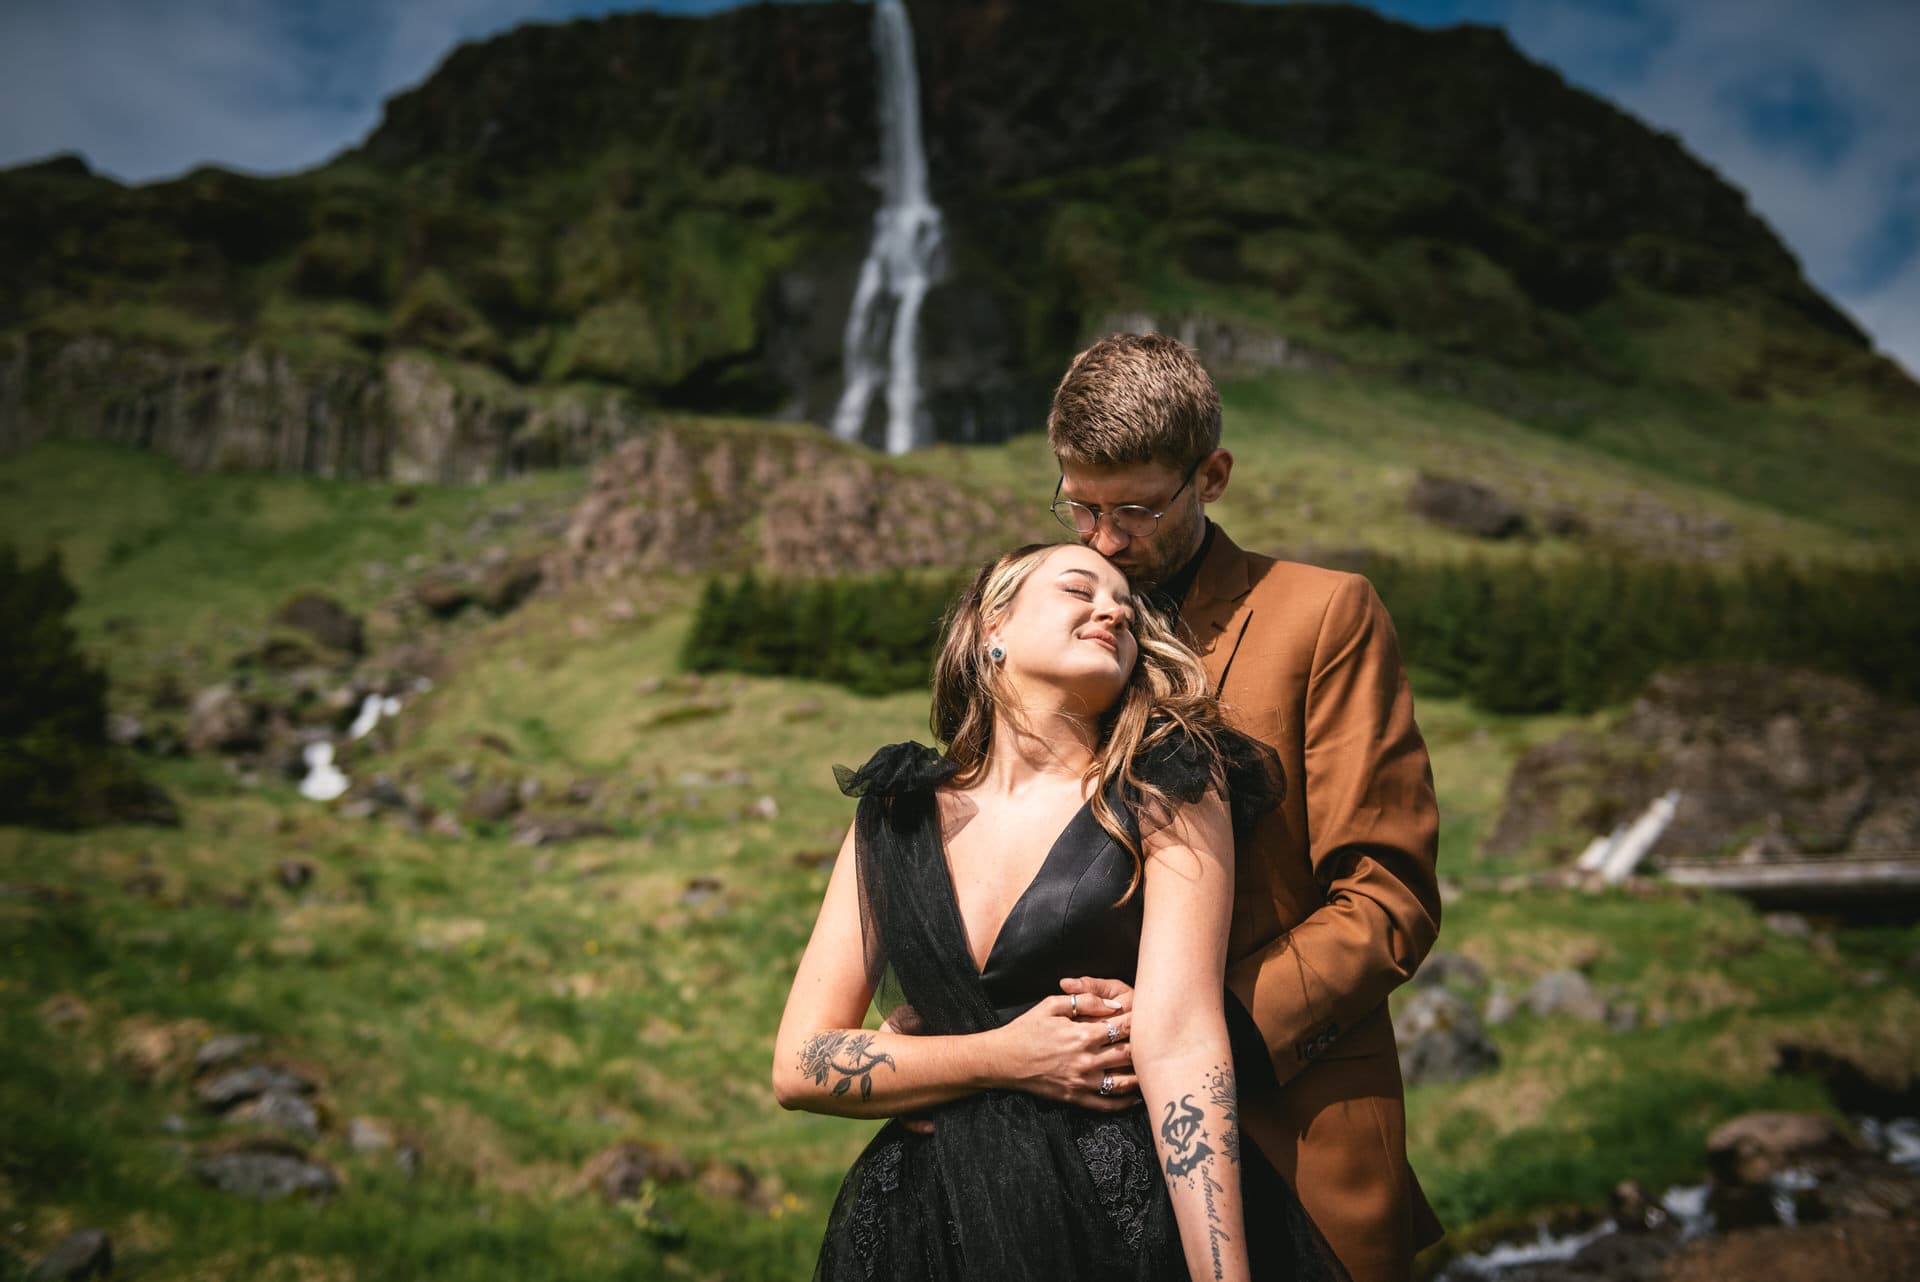 Groom's tender embrace warms the bride against the cool Icelandic breeze.